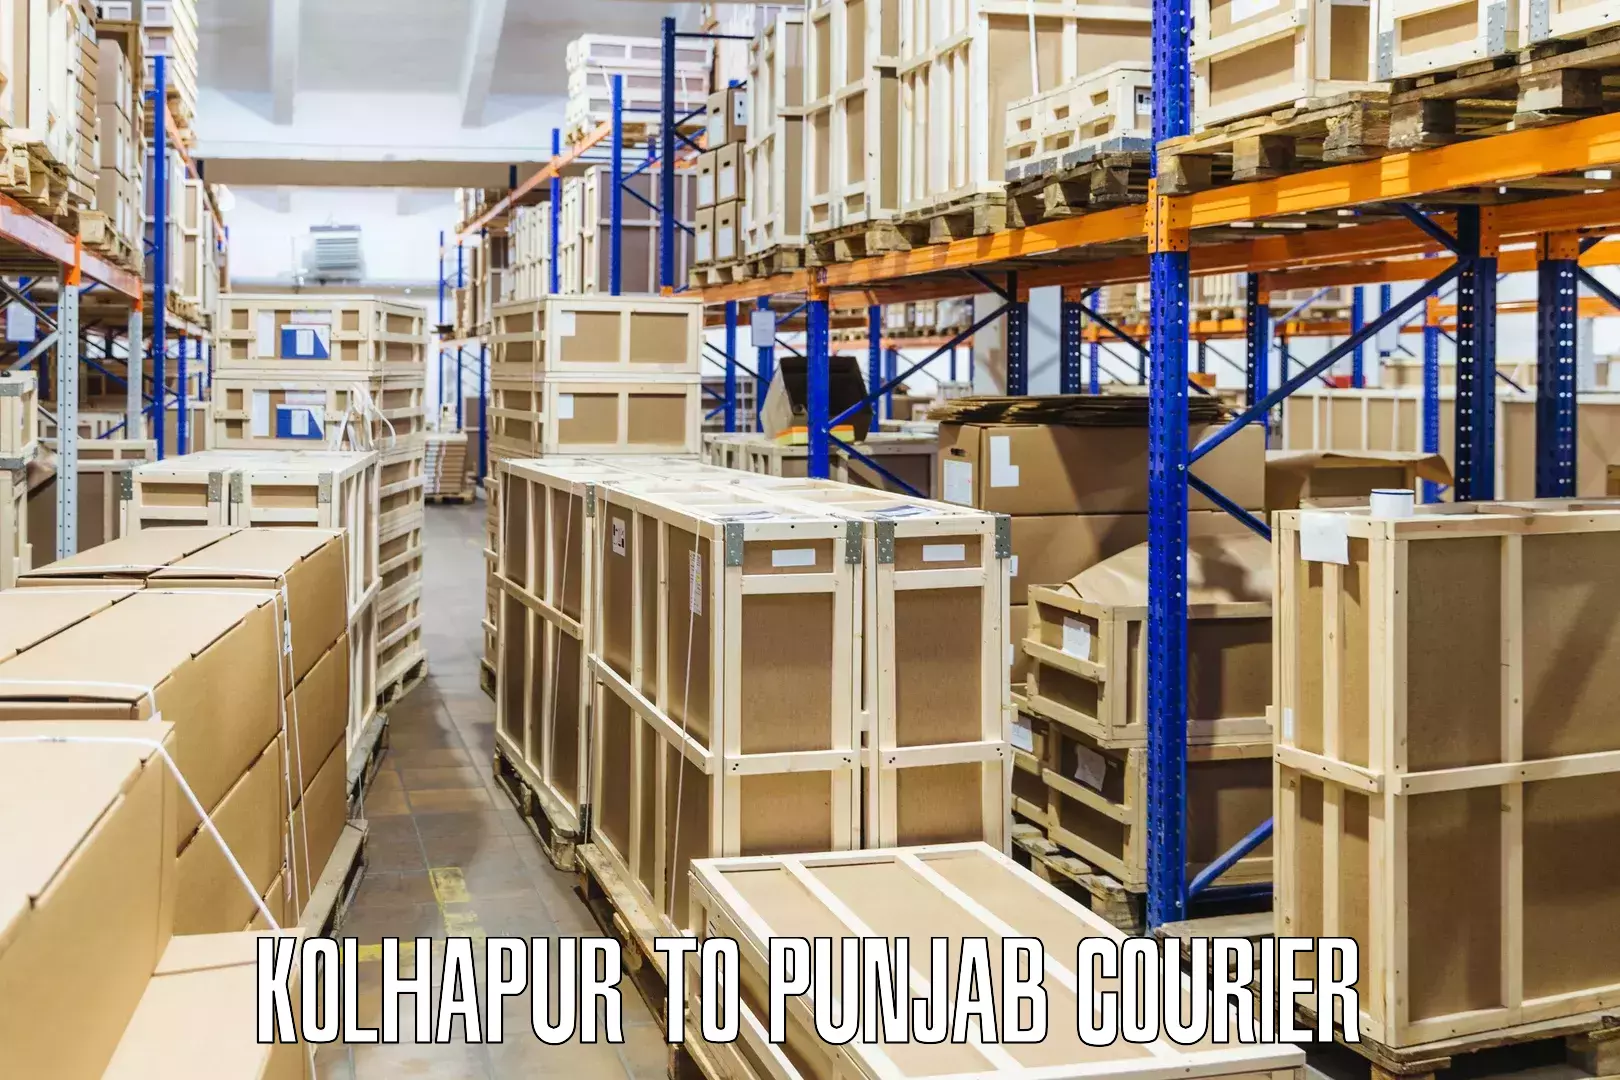 Global freight services Kolhapur to Mohali